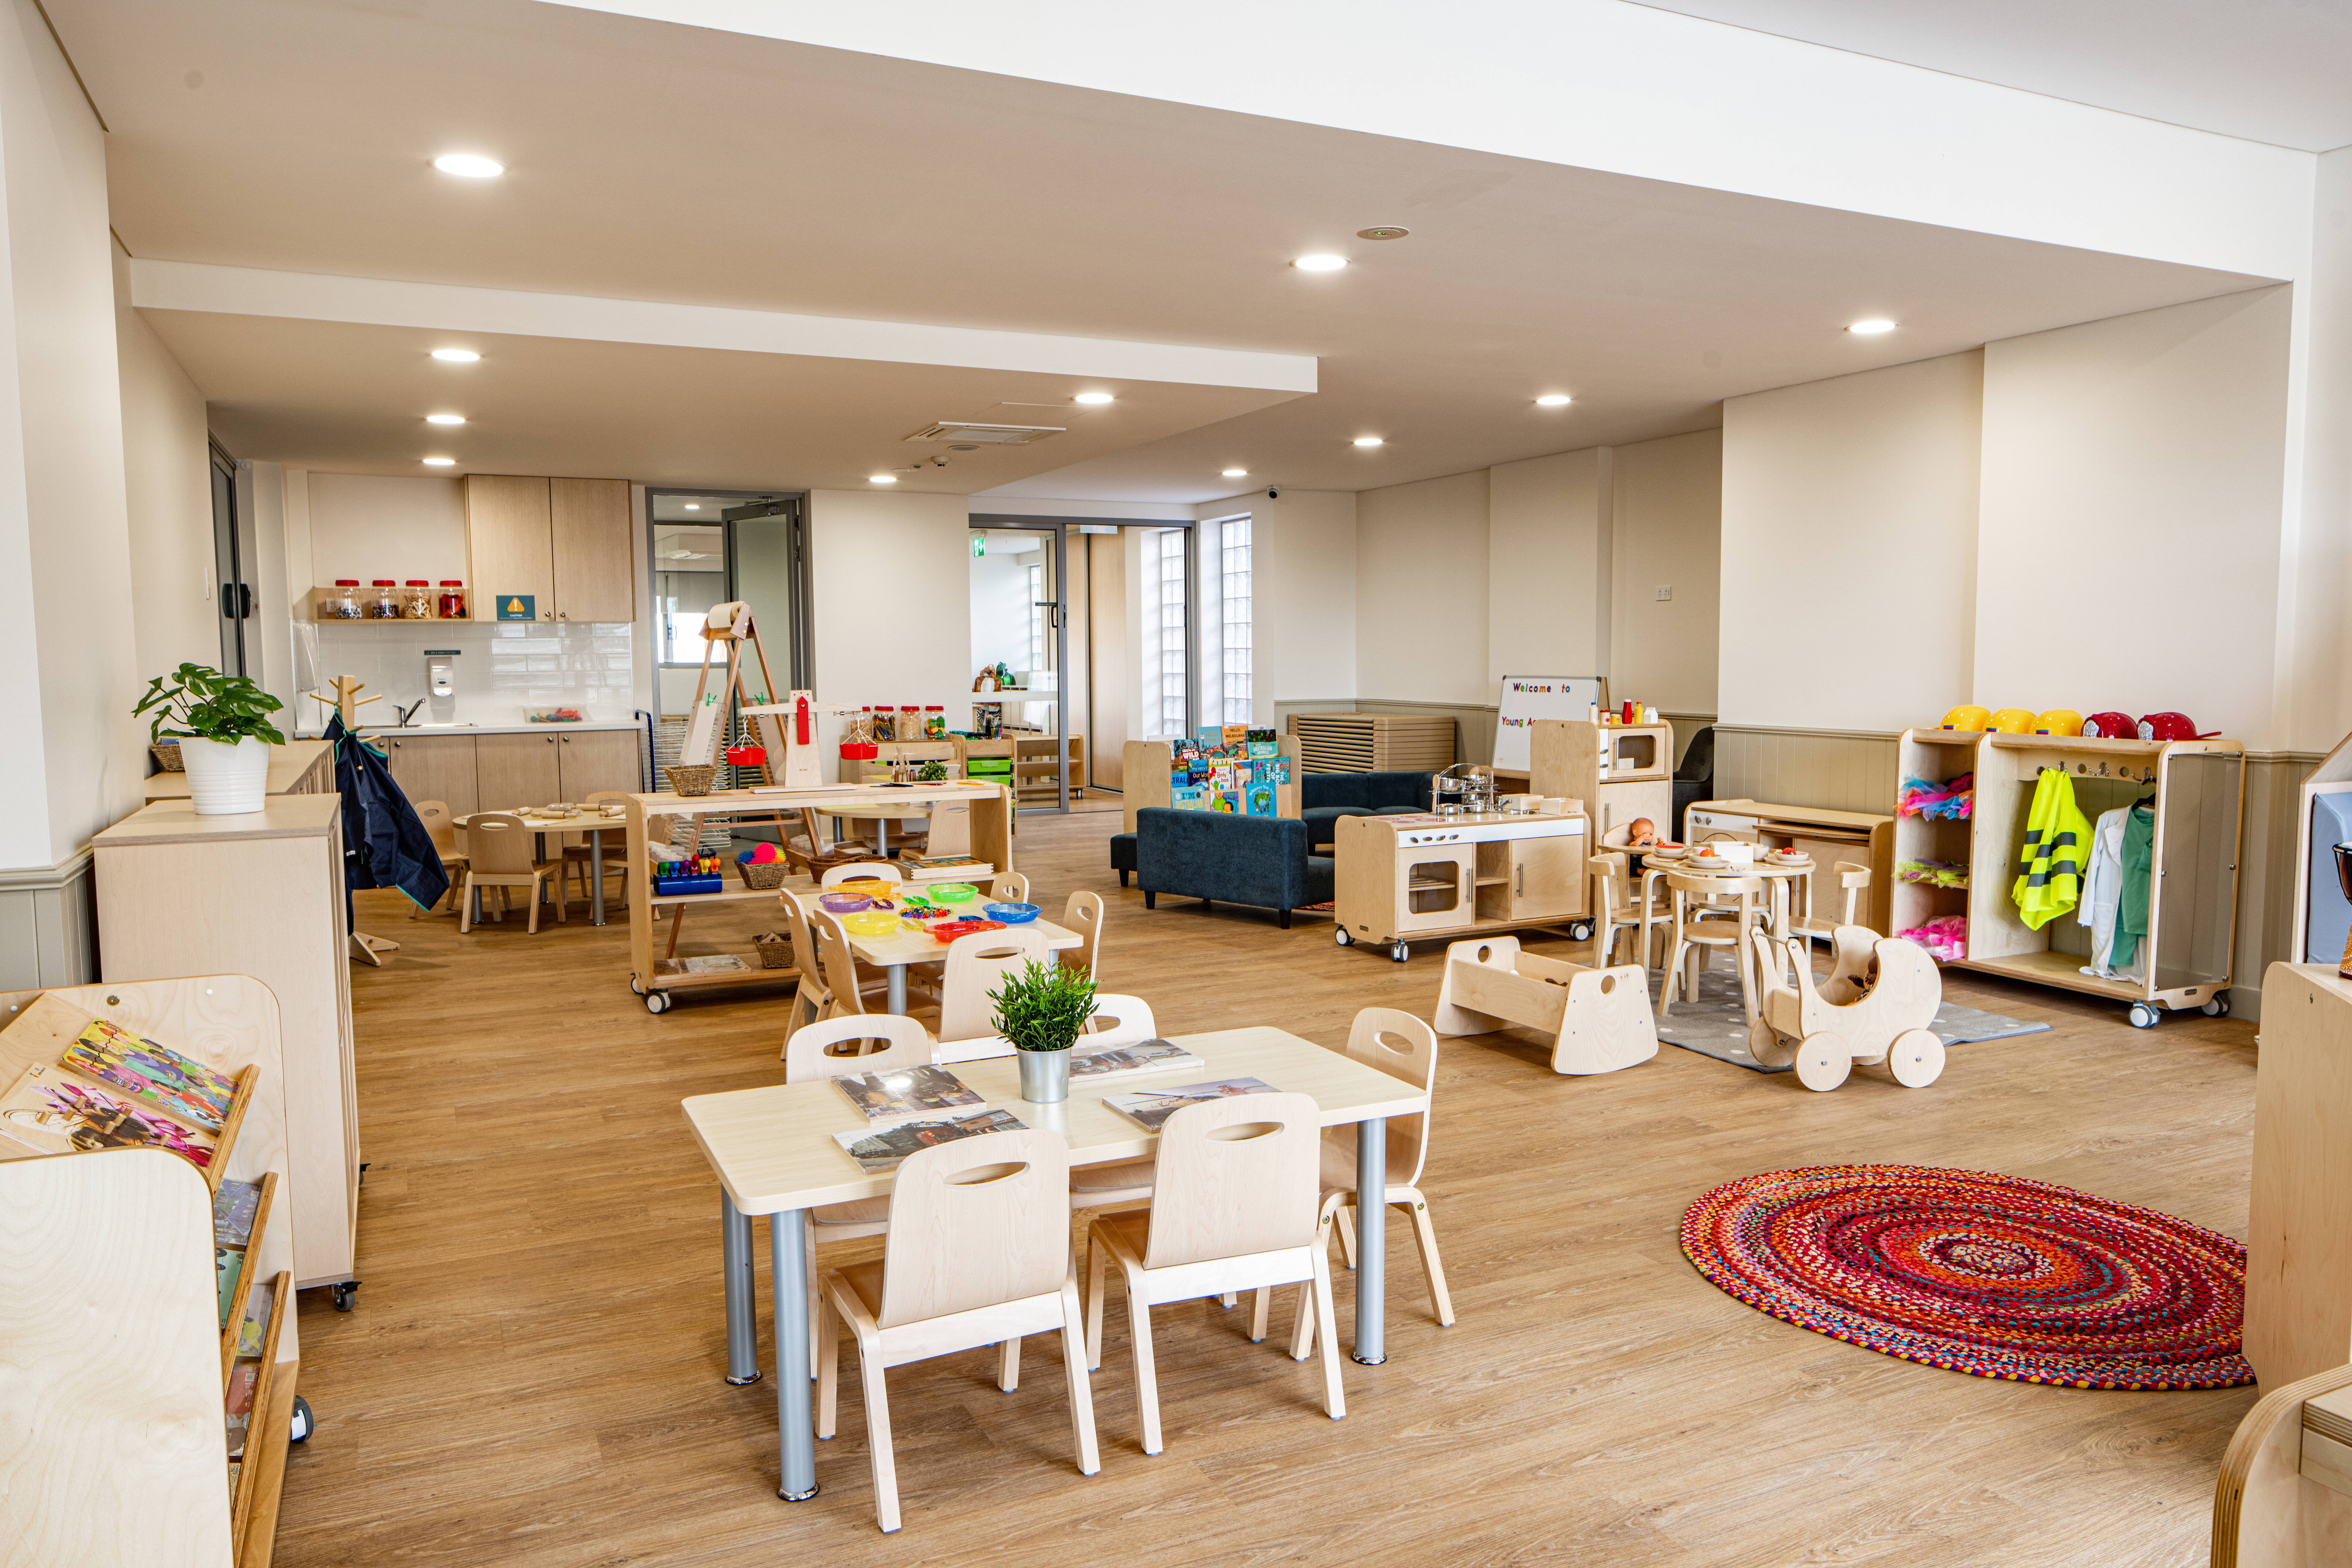 Whiz Kidz Early Learning Centre & Pre-school - Pendle Hill, Bungaree Rd